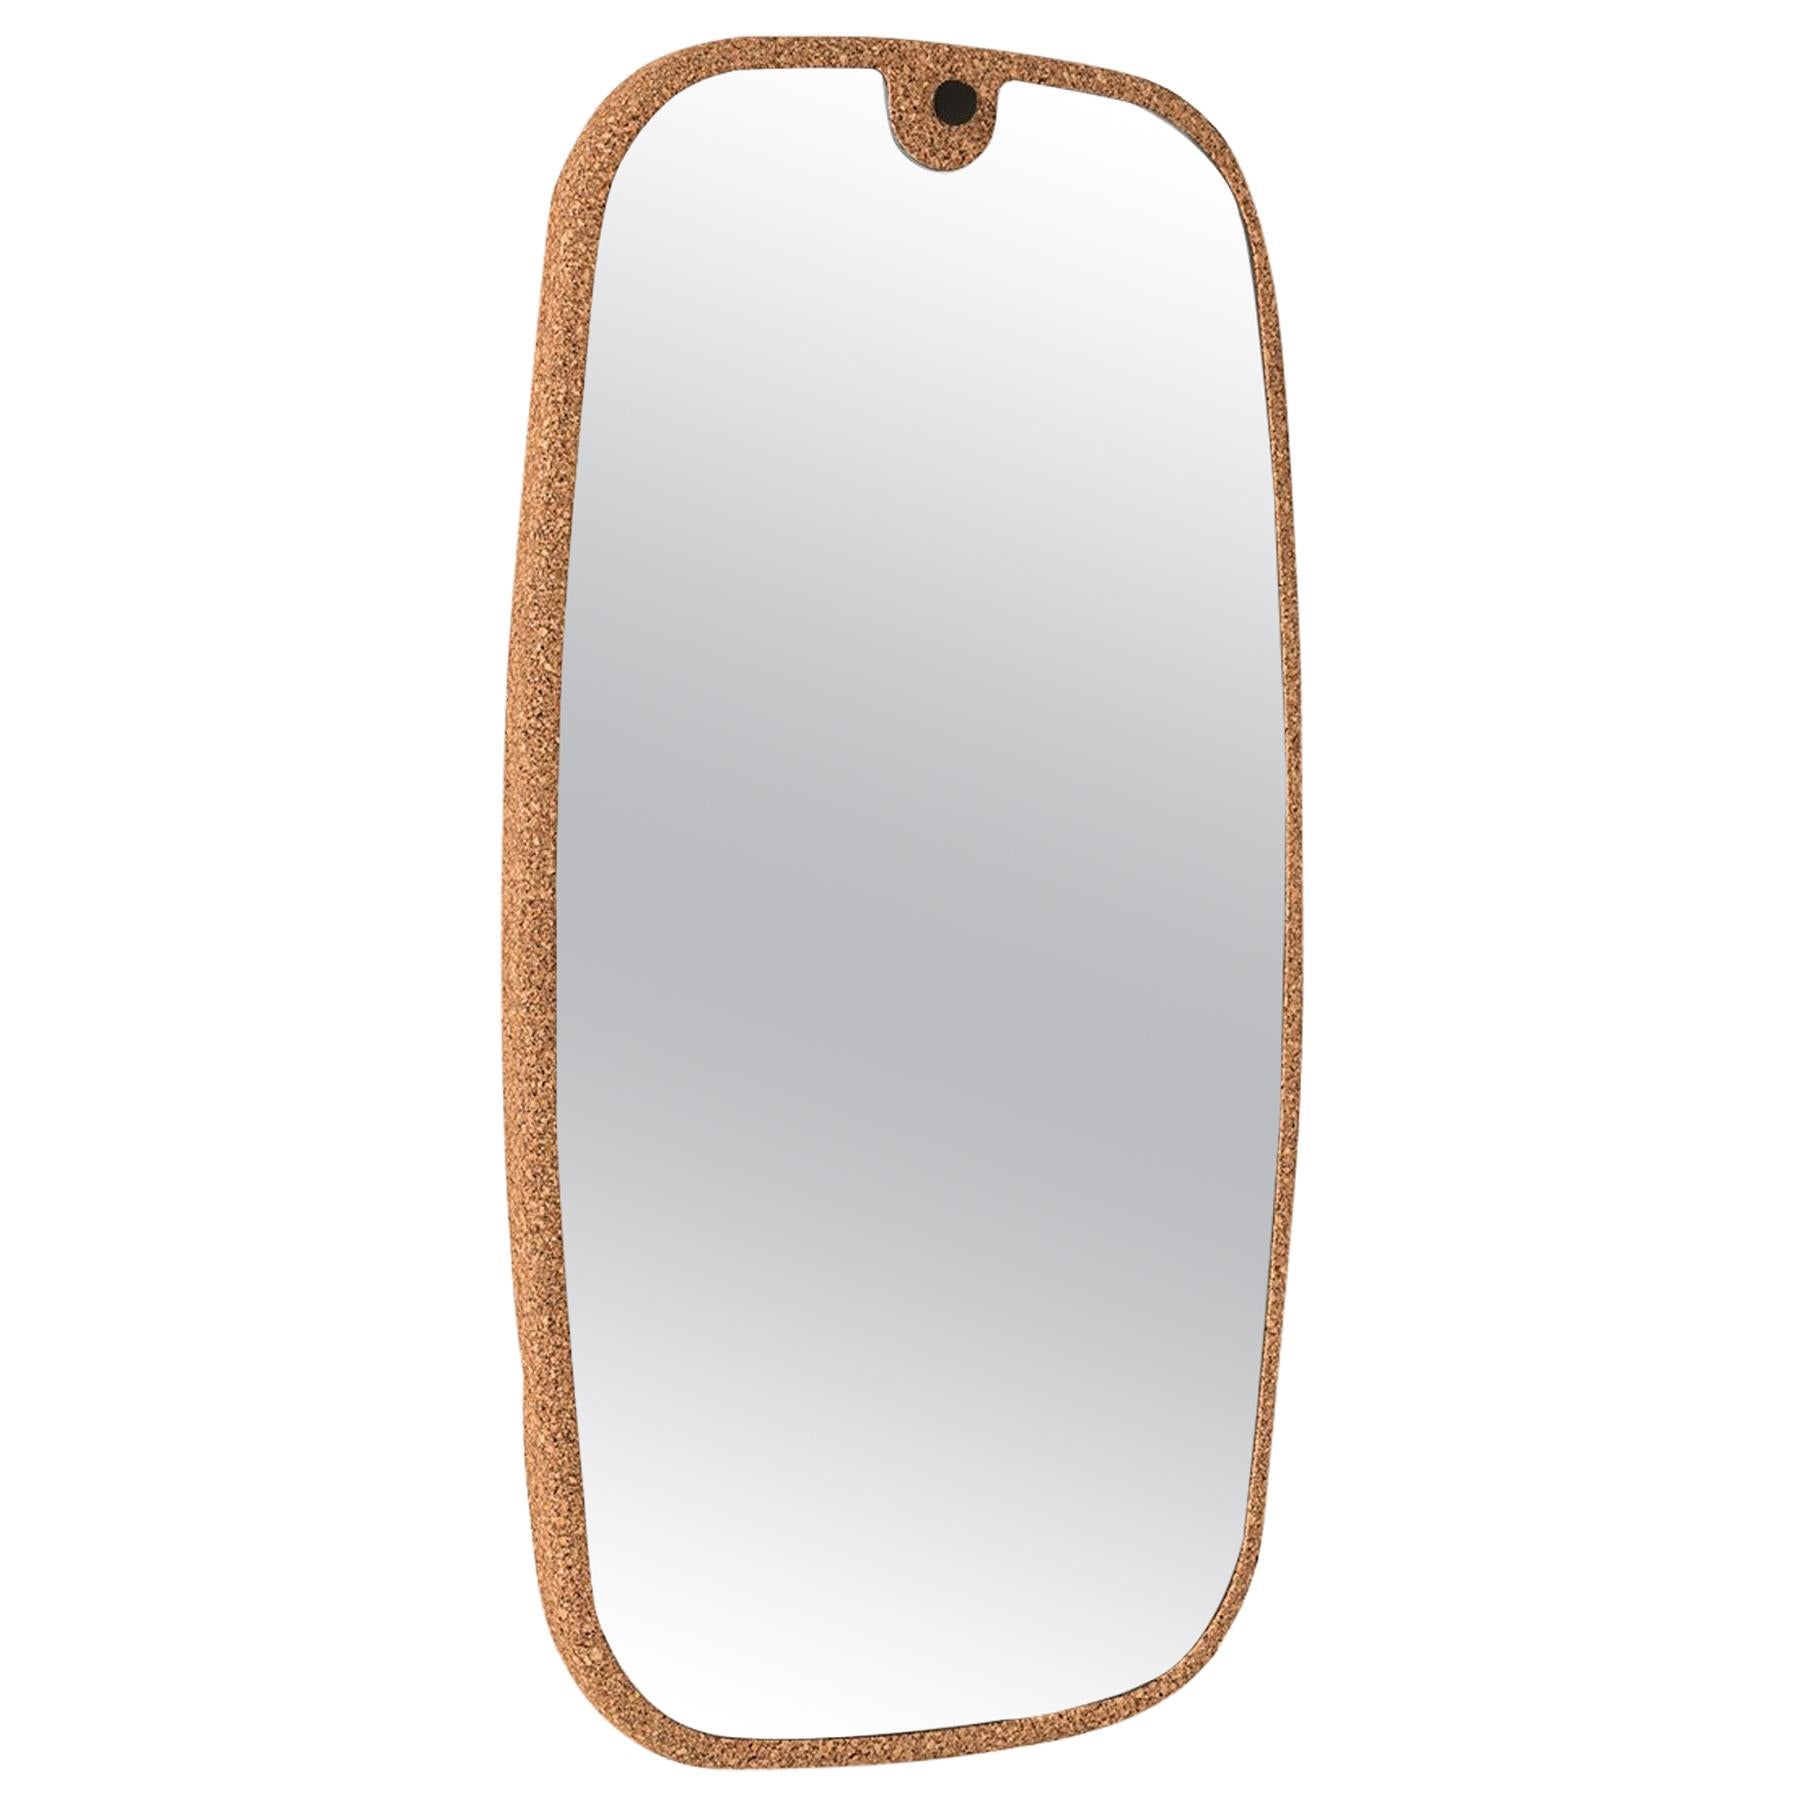 Kormirò Mirror in Natural Cork and Extra Light Mirror by Discipline Lab For Sale